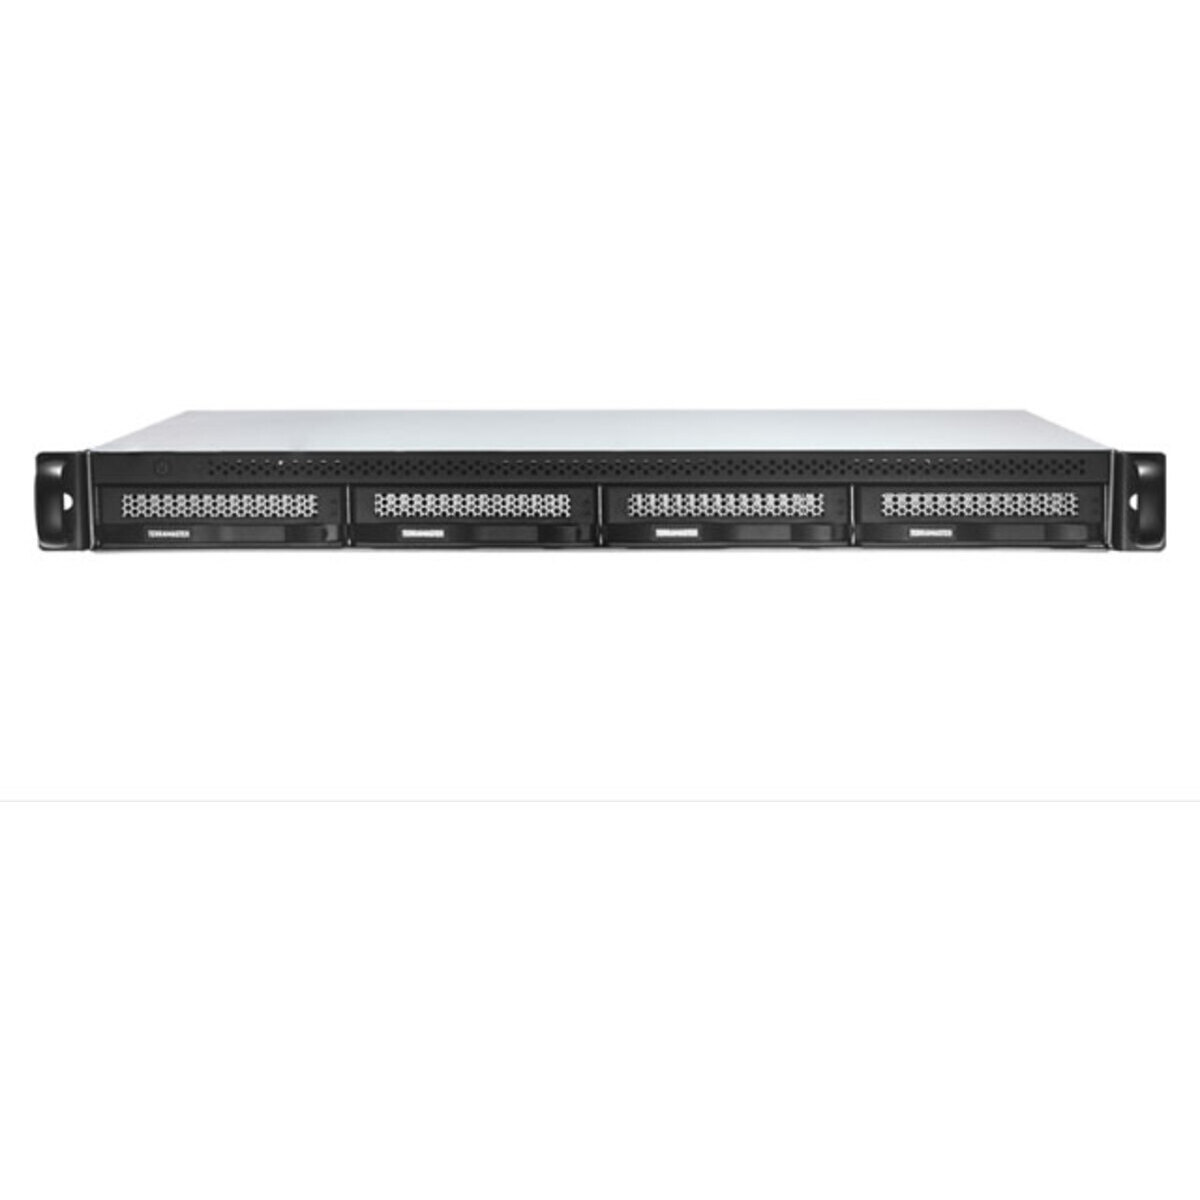 TerraMaster U4-423 4tb 4-Bay RackMount Multimedia / Power User / Business NAS - Network Attached Storage Device 4x1tb Western Digital Red SA500 WDS100T1R0A 2.5 560/530MB/s SATA 6Gb/s SSD NAS Class Drives Installed - Burn-In Tested - FREE RAM UPGRADE U4-423